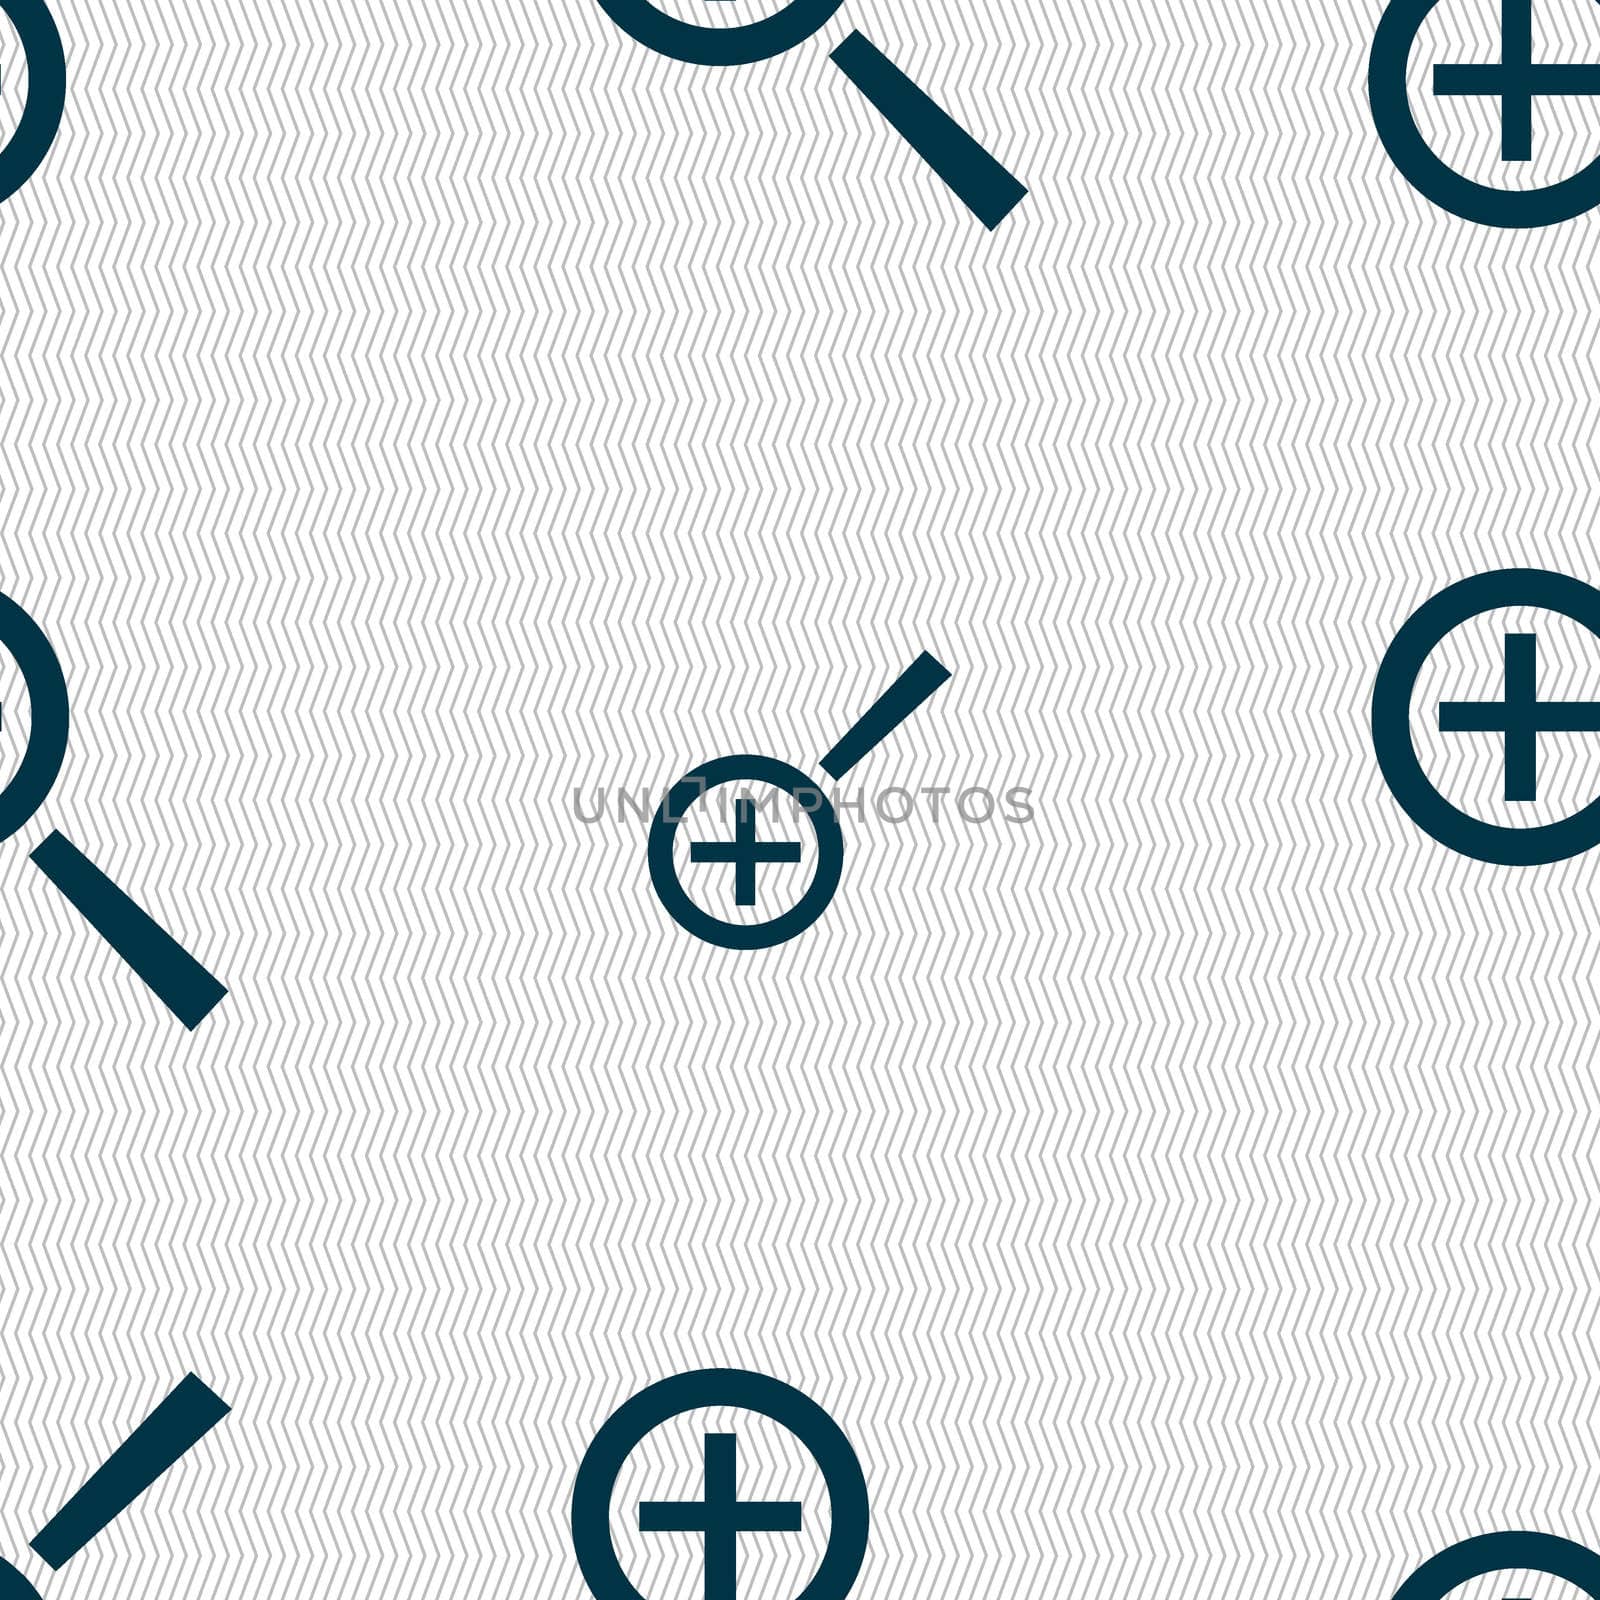 Magnifier glass, Zoom tool icon sign. Seamless abstract background with geometric shapes.  by serhii_lohvyniuk